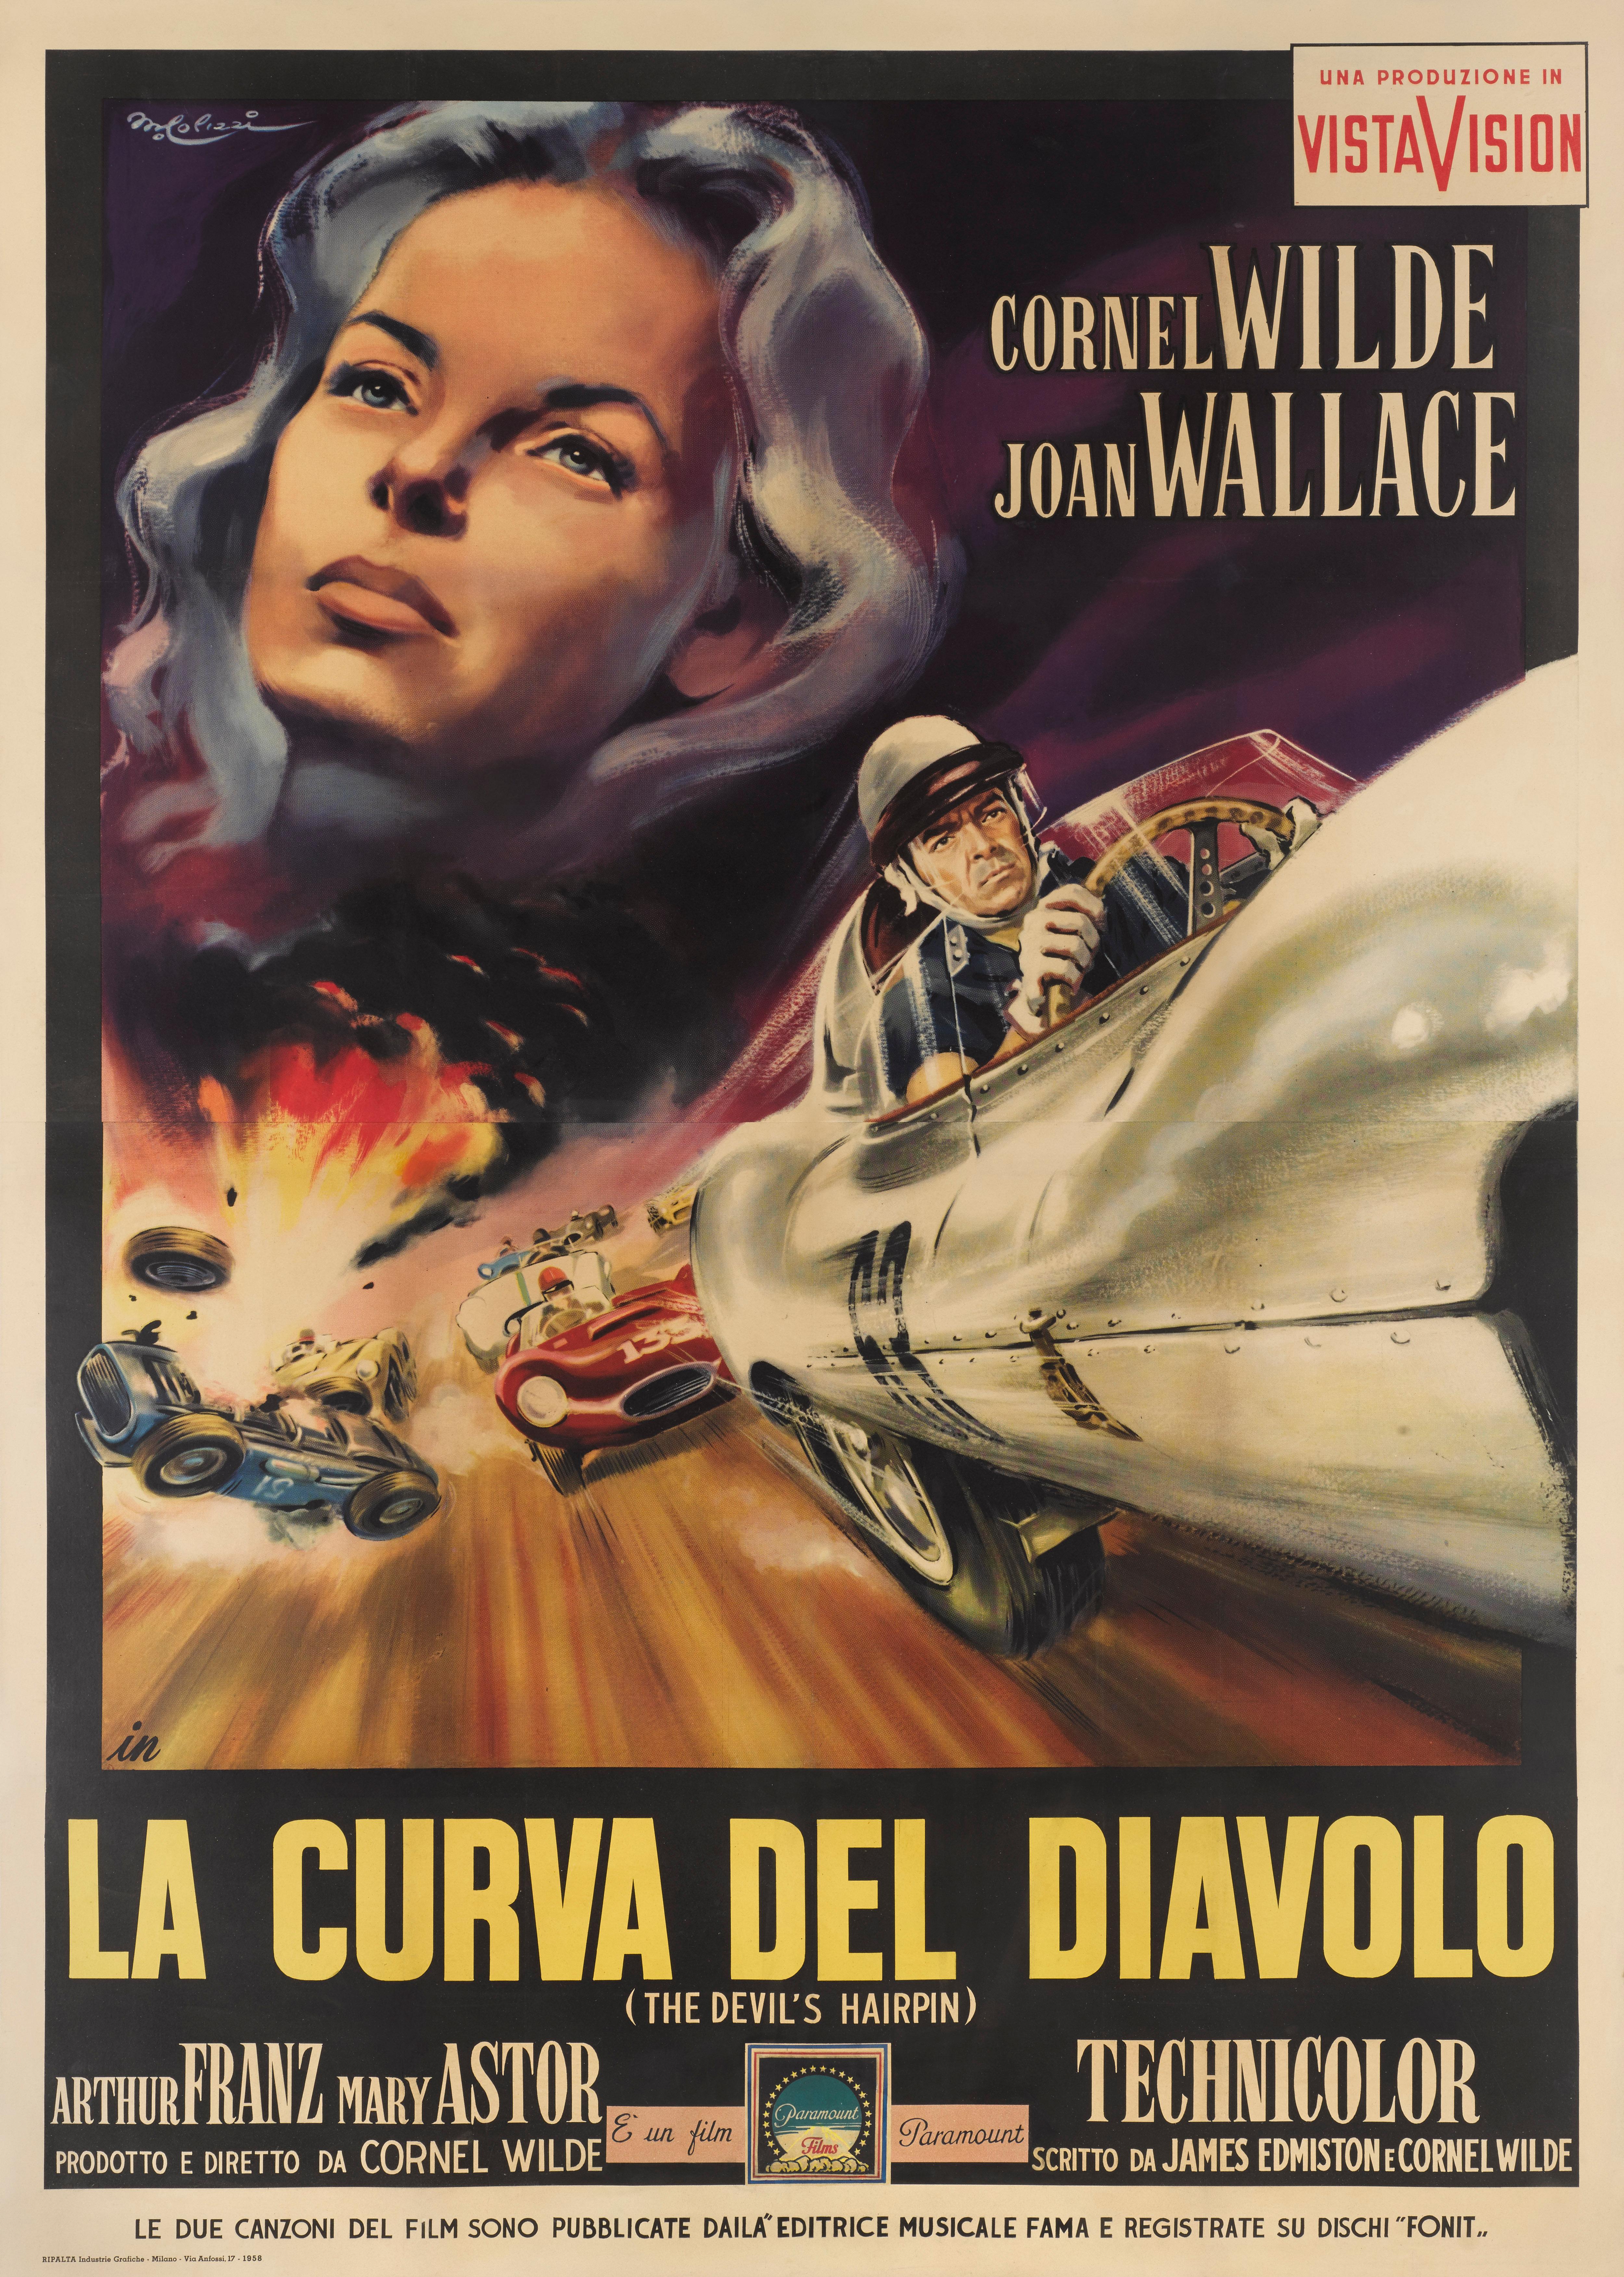 Original Italian film poster for the The Devil's Hairpin 1957.
This film was written, directed and stars Cornel Wilde. The film is about a retired racing driver who is tempted back into racing by a new champion racer.